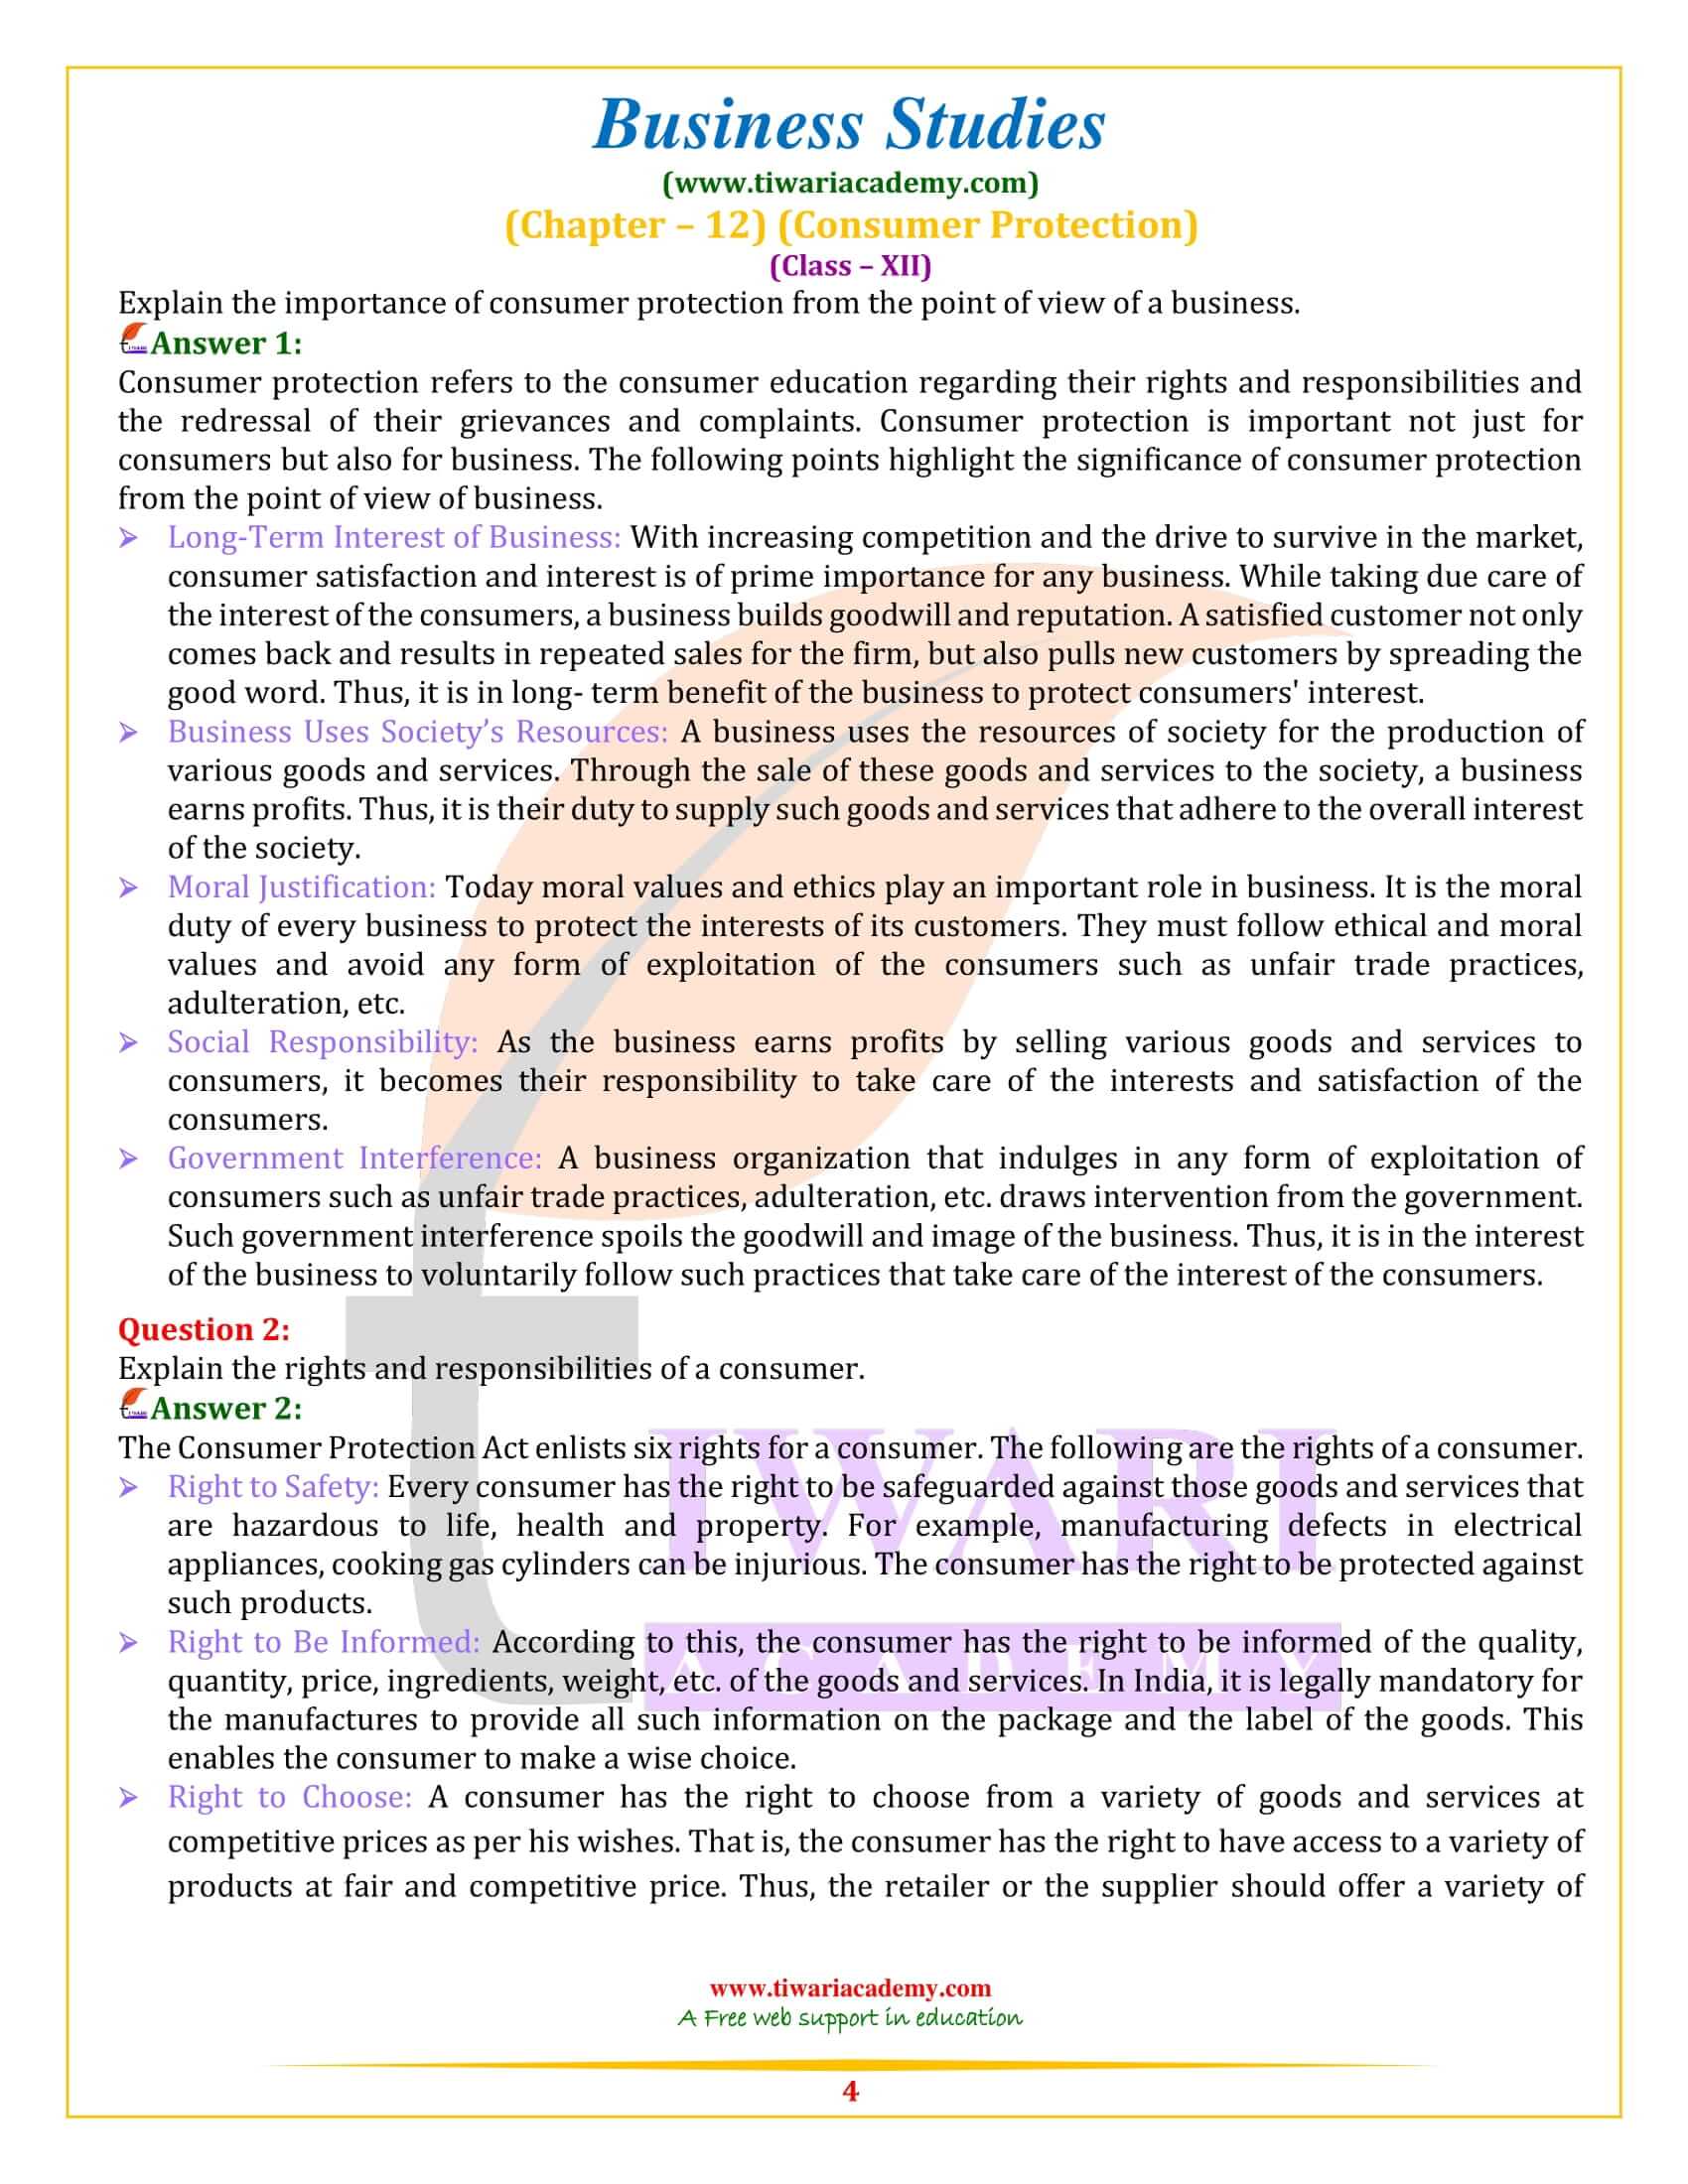 NCERT Solutions for Class 12 Business Studies Chapter 12 in PDF